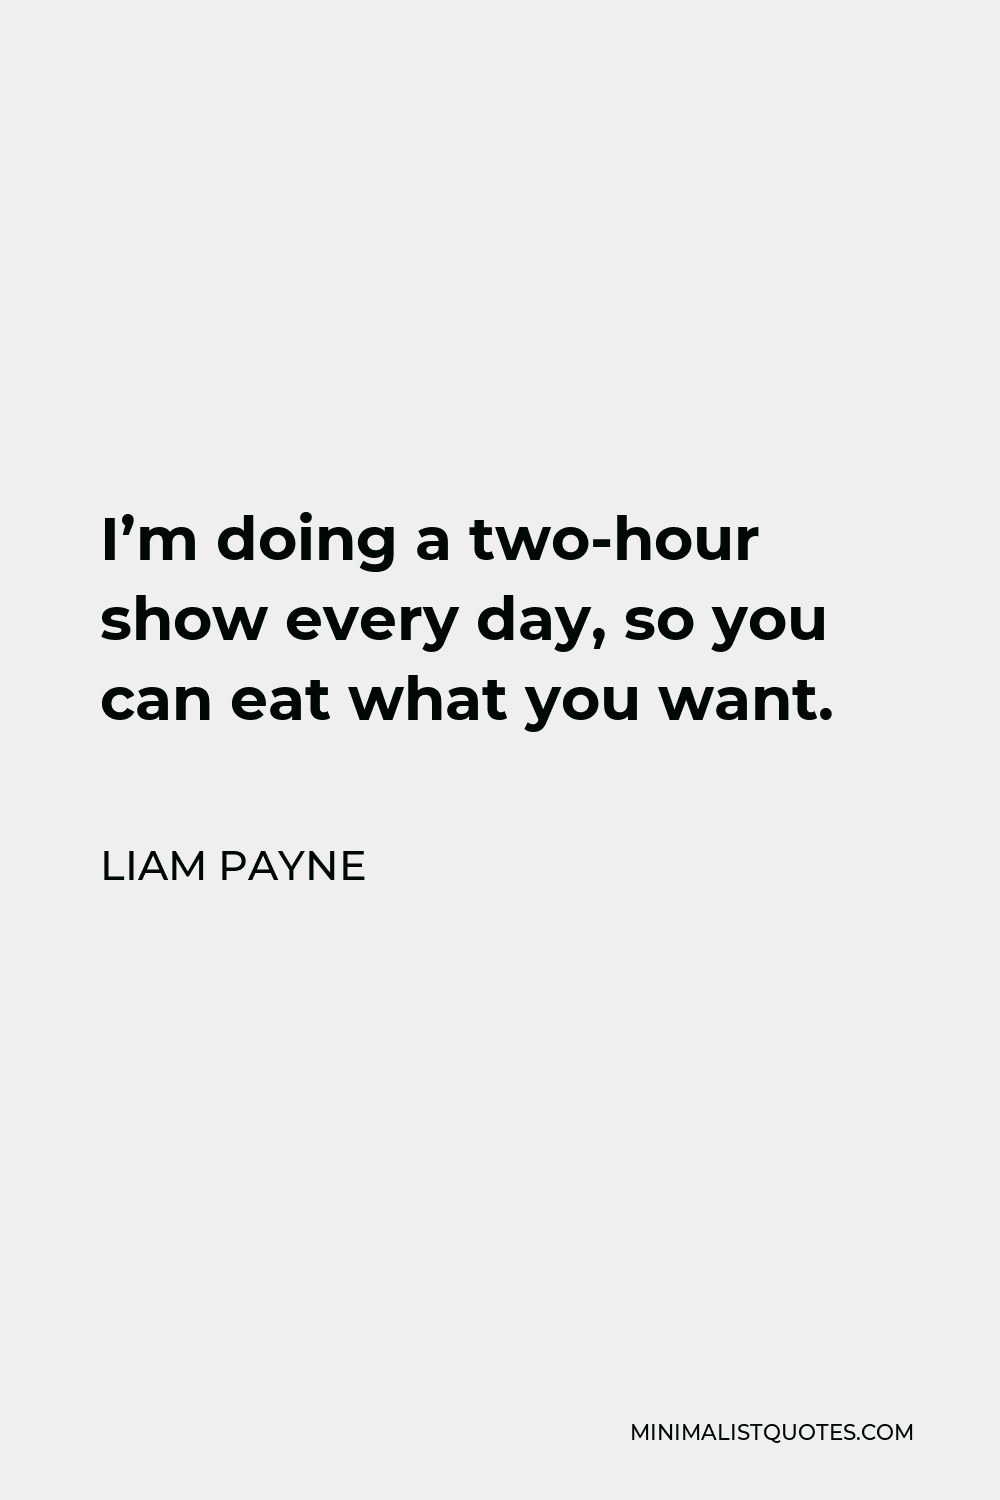 Liam Payne Quote - I’m doing a two-hour show every day, so you can eat what you want.